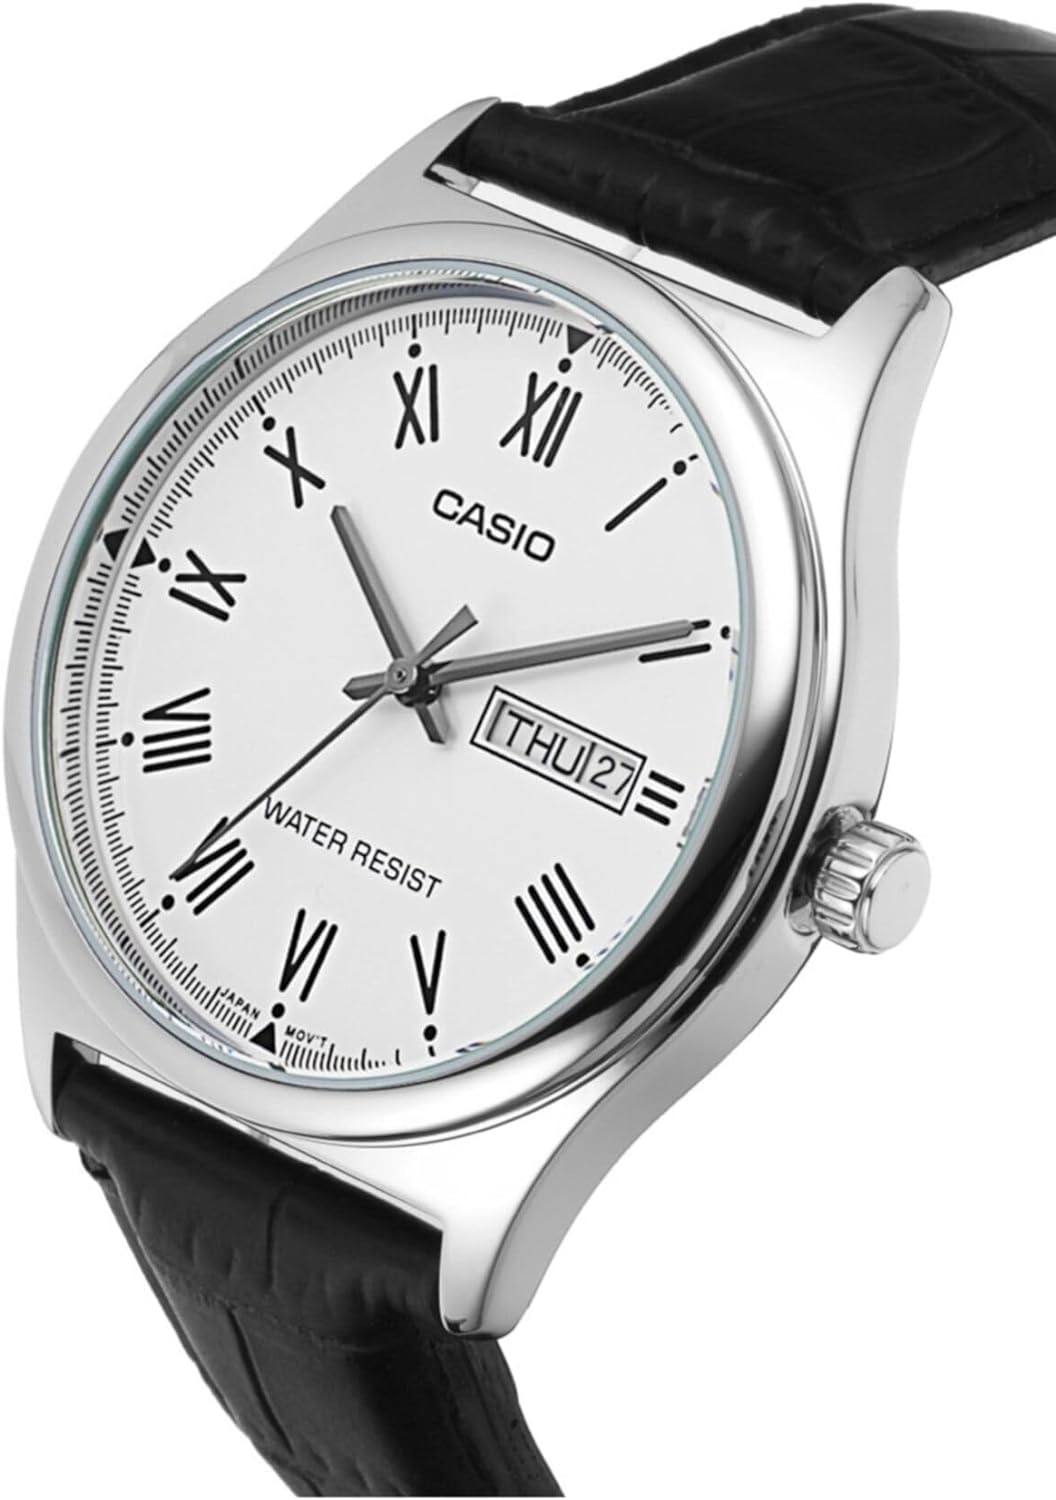 Casio Men's Silver Dial Leather Analog Watch